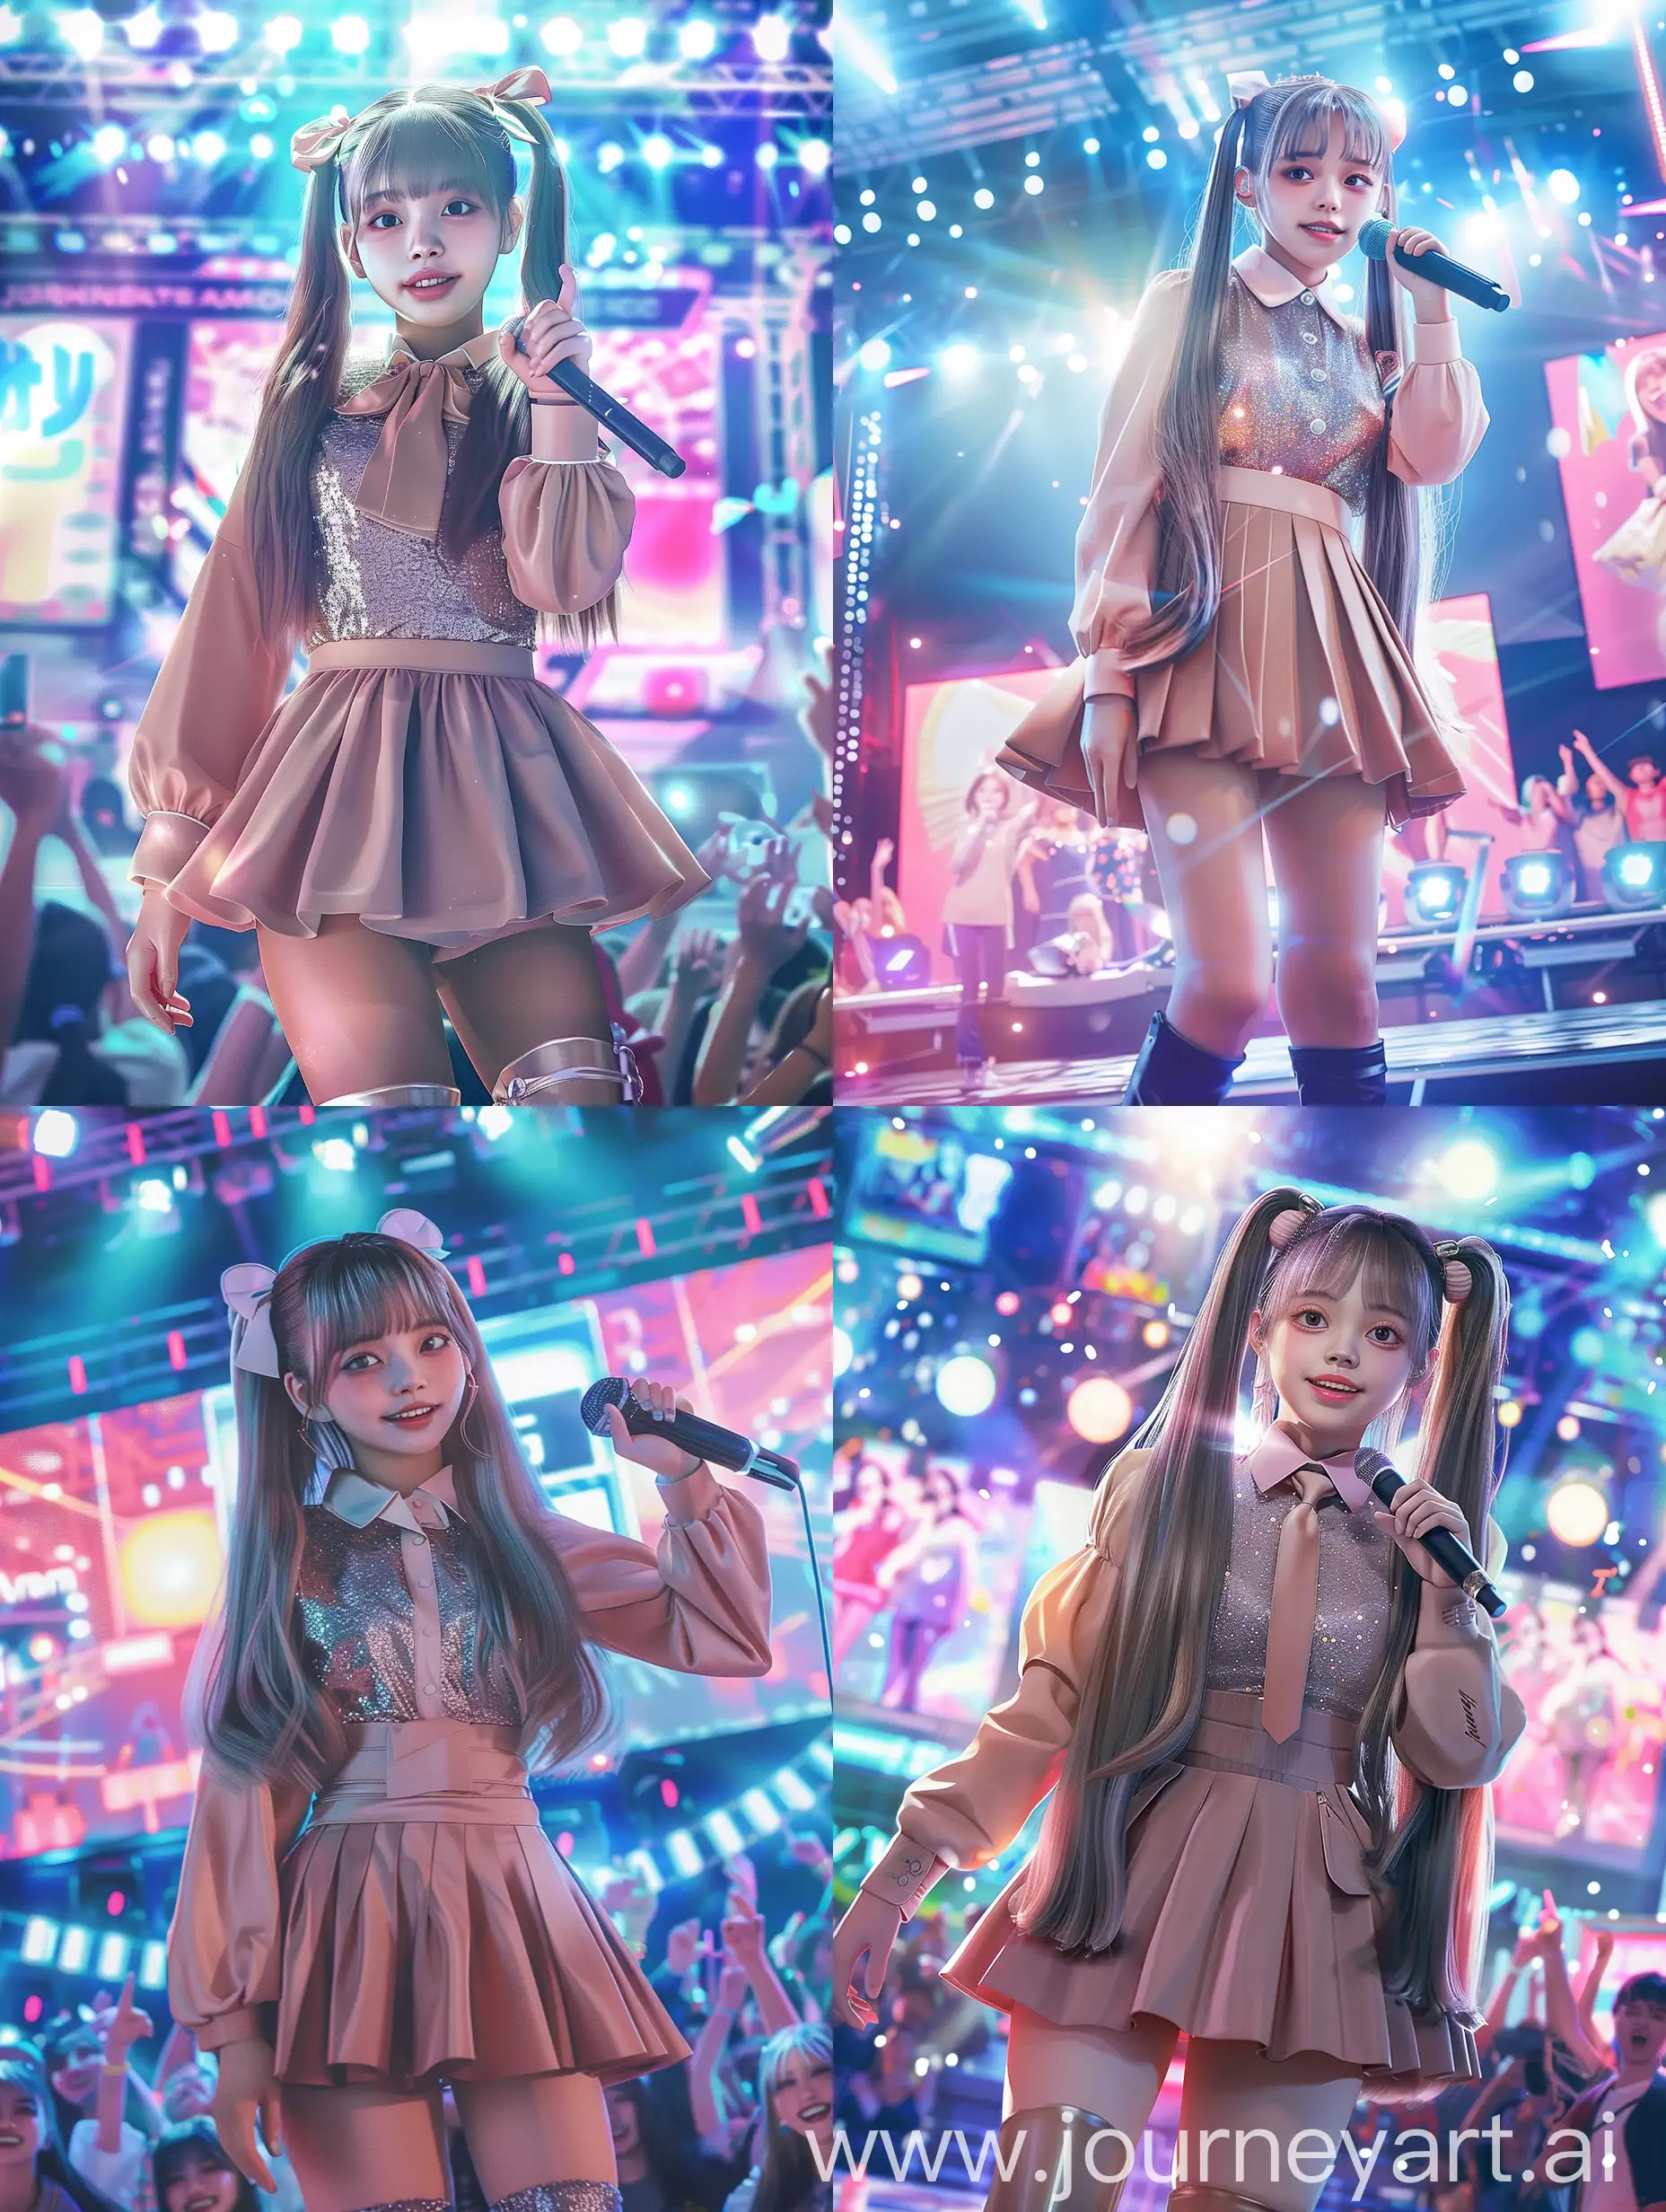 A young and energetic Japanese idol stands on a brightly lit stage. She holds a microphone in her right hand and wears a confident, charming smile. Her long, flowing black hair is styled in loose waves. Her outfit is stylish and colorful, with a short skirt, glittery top and high boots. The backdrop is filled with vibrant lights and cheering fans. The stage has a modern design with LED screens displaying dynamic images. The feel is photorealistic.